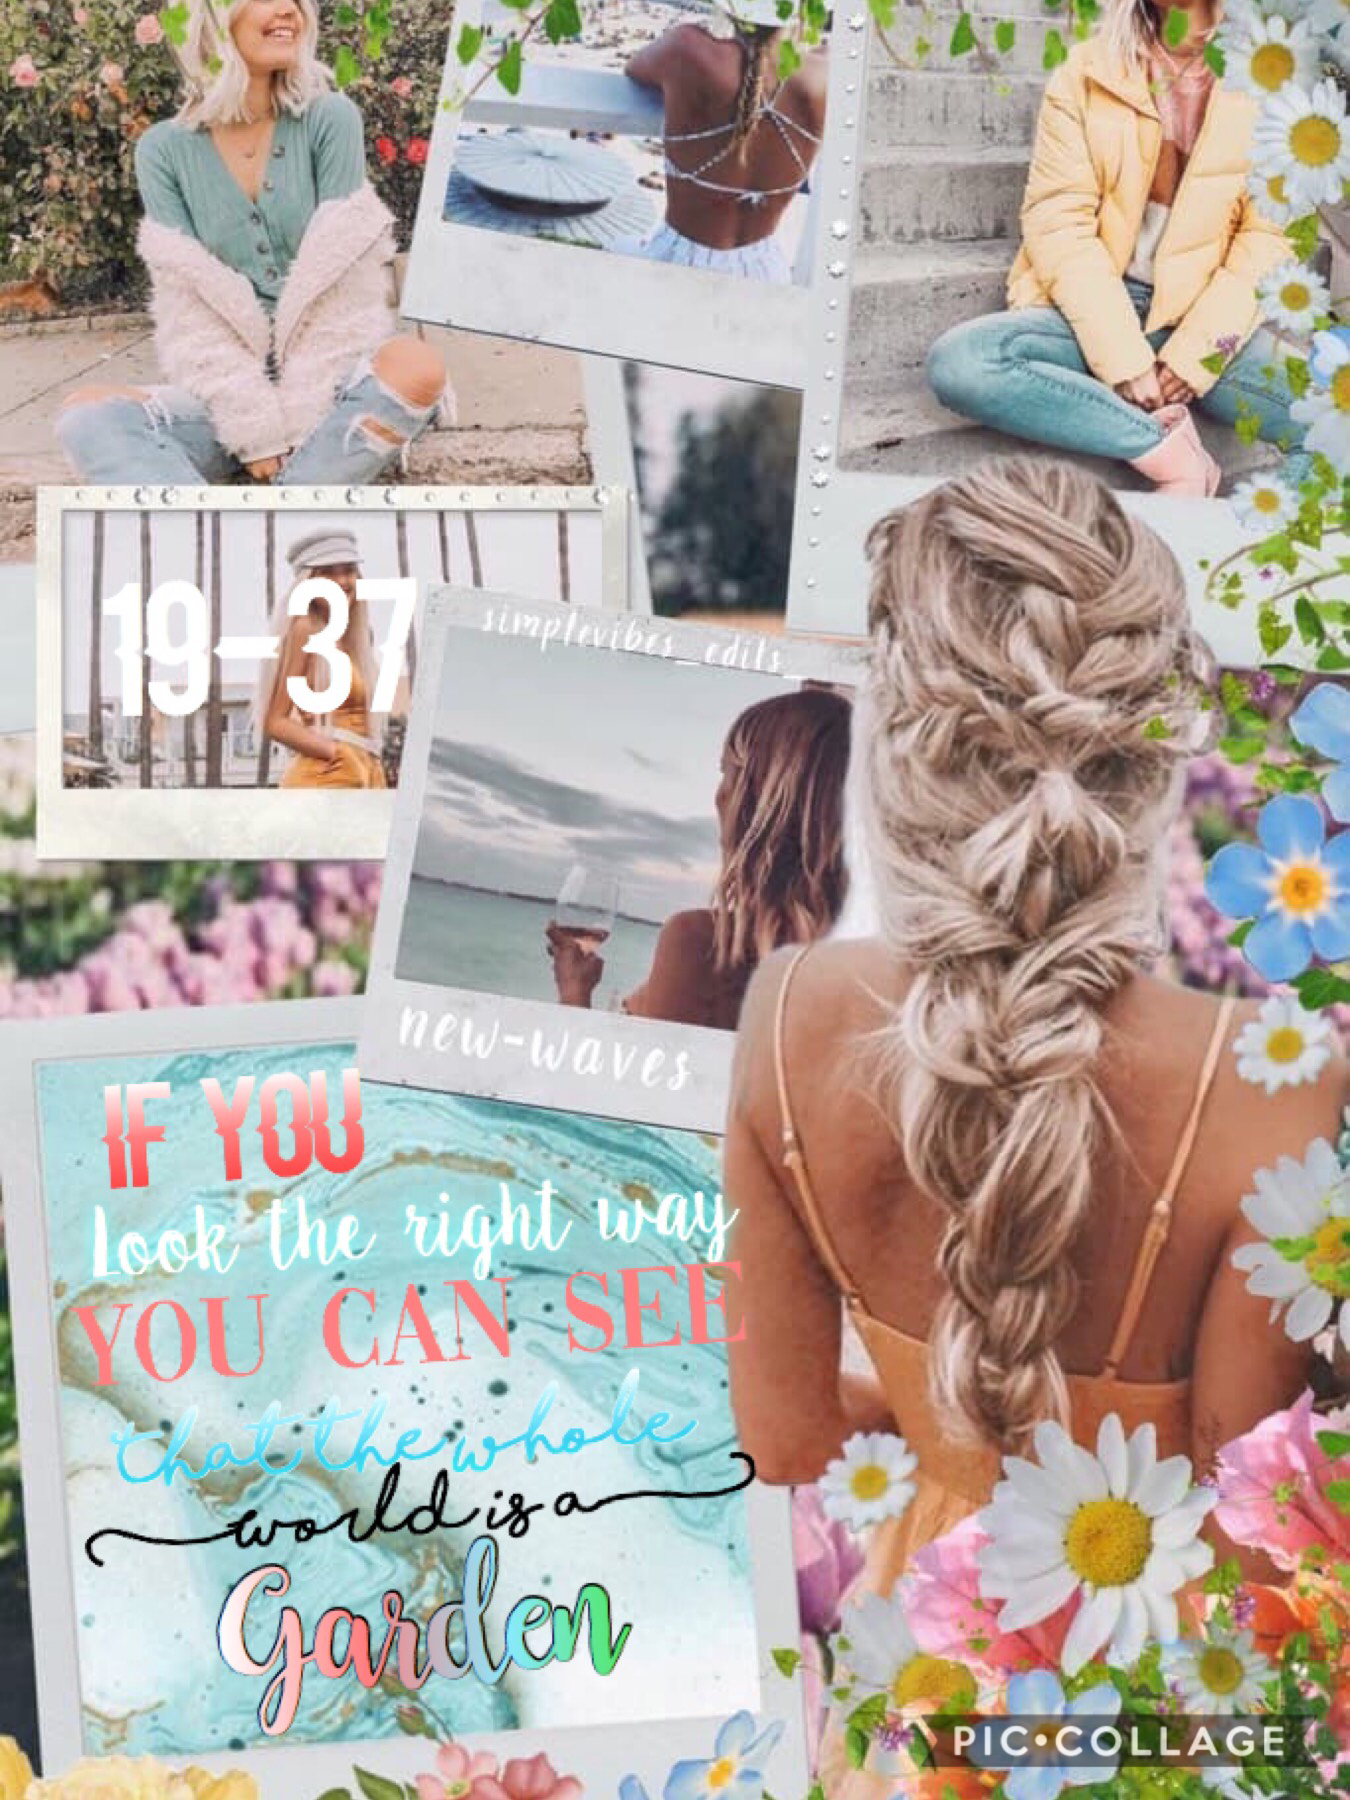 Collab with the amazing 🥁
New-waves she is so kind and sweet she makes awesome collages, make sure to go like all of her collages, hip you like this collab lysm🌻☀️❤️